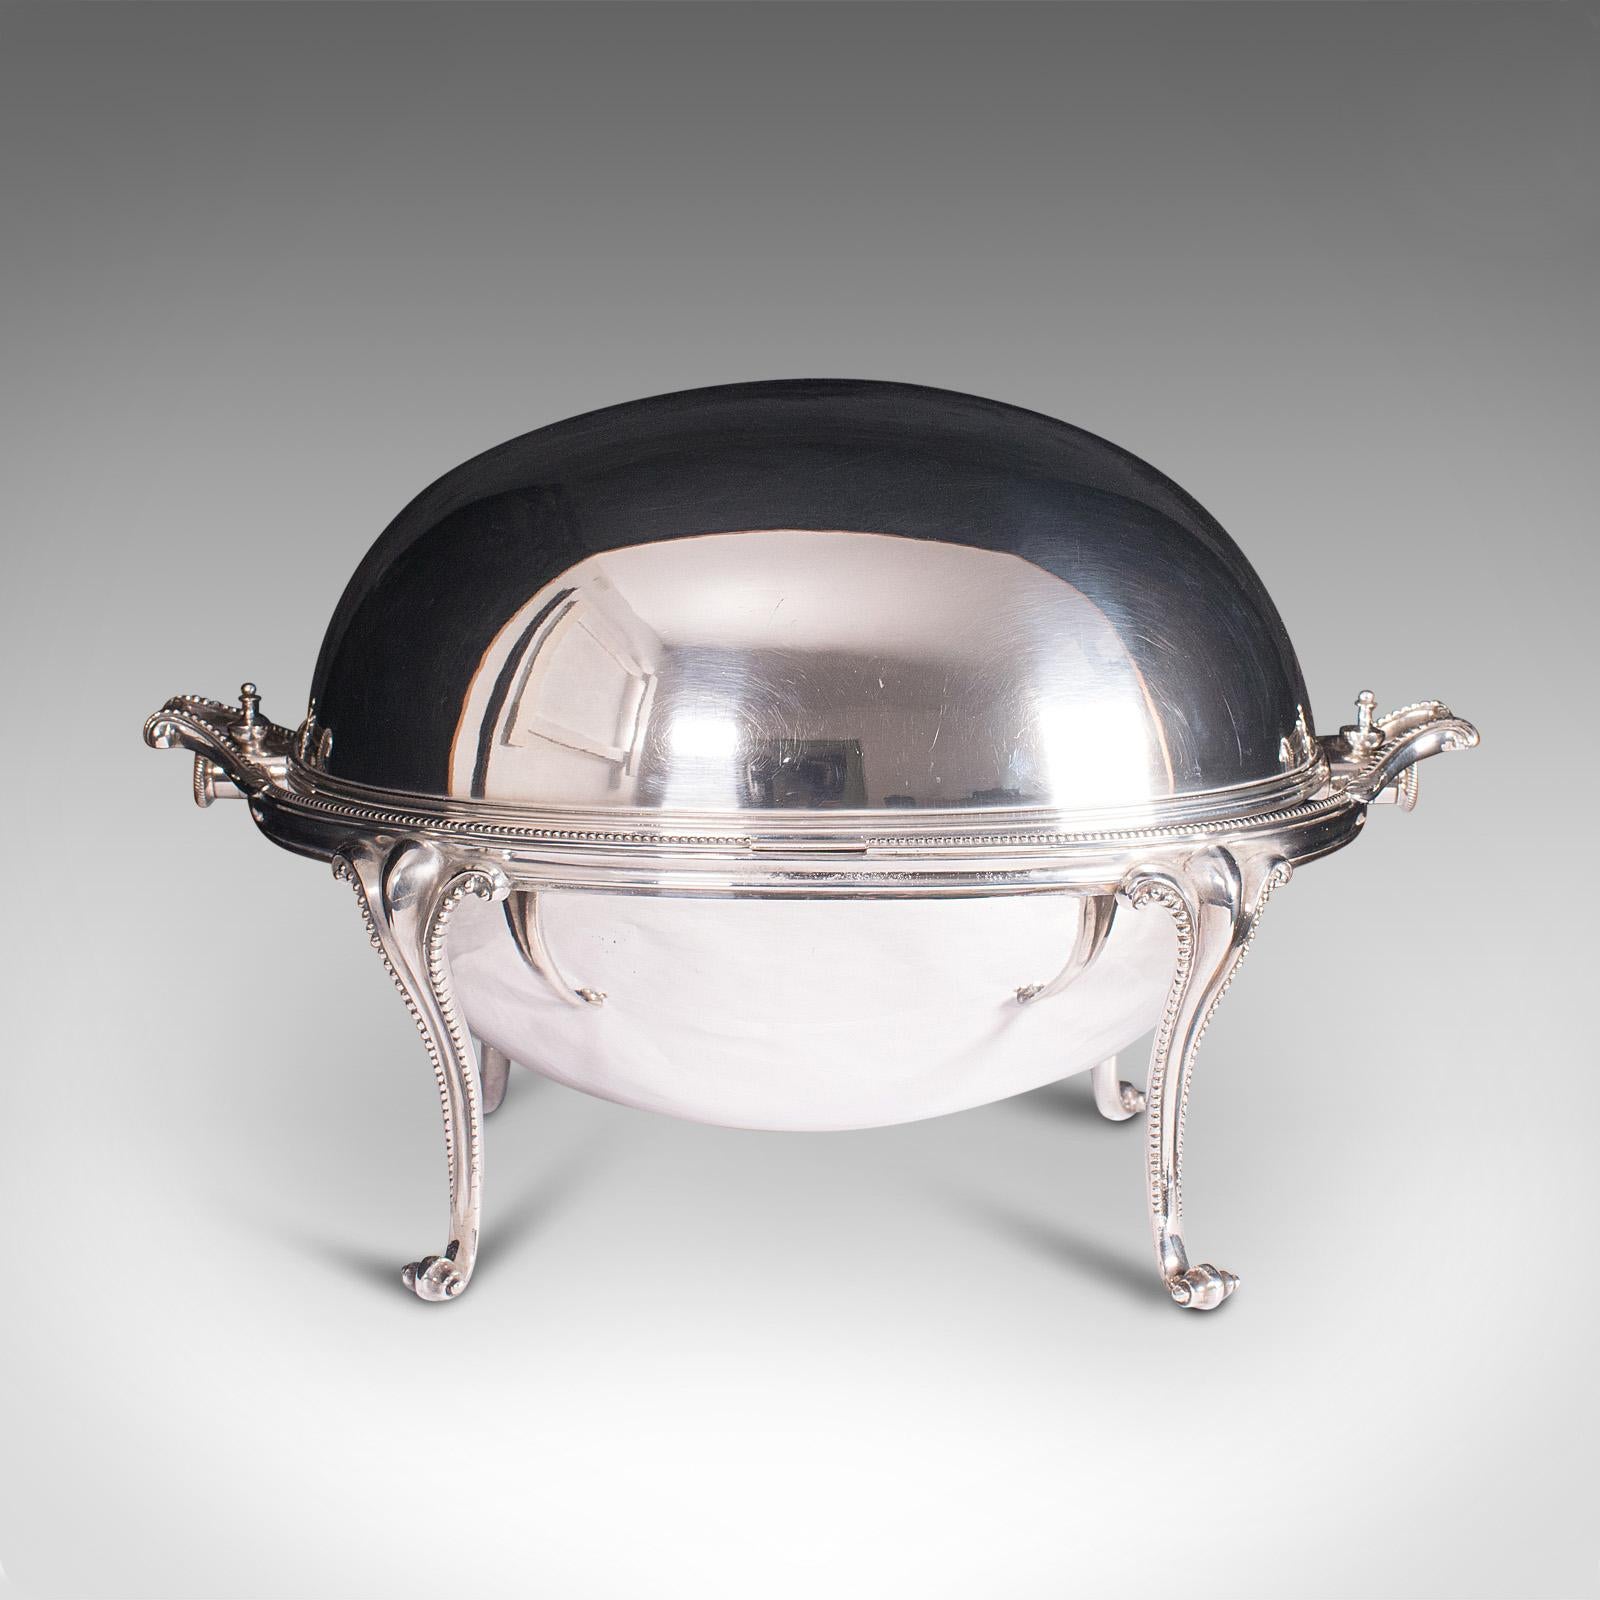 British Antique Rollover Butter Dish, English, Silver Plate, Soup Tureen, Victorian